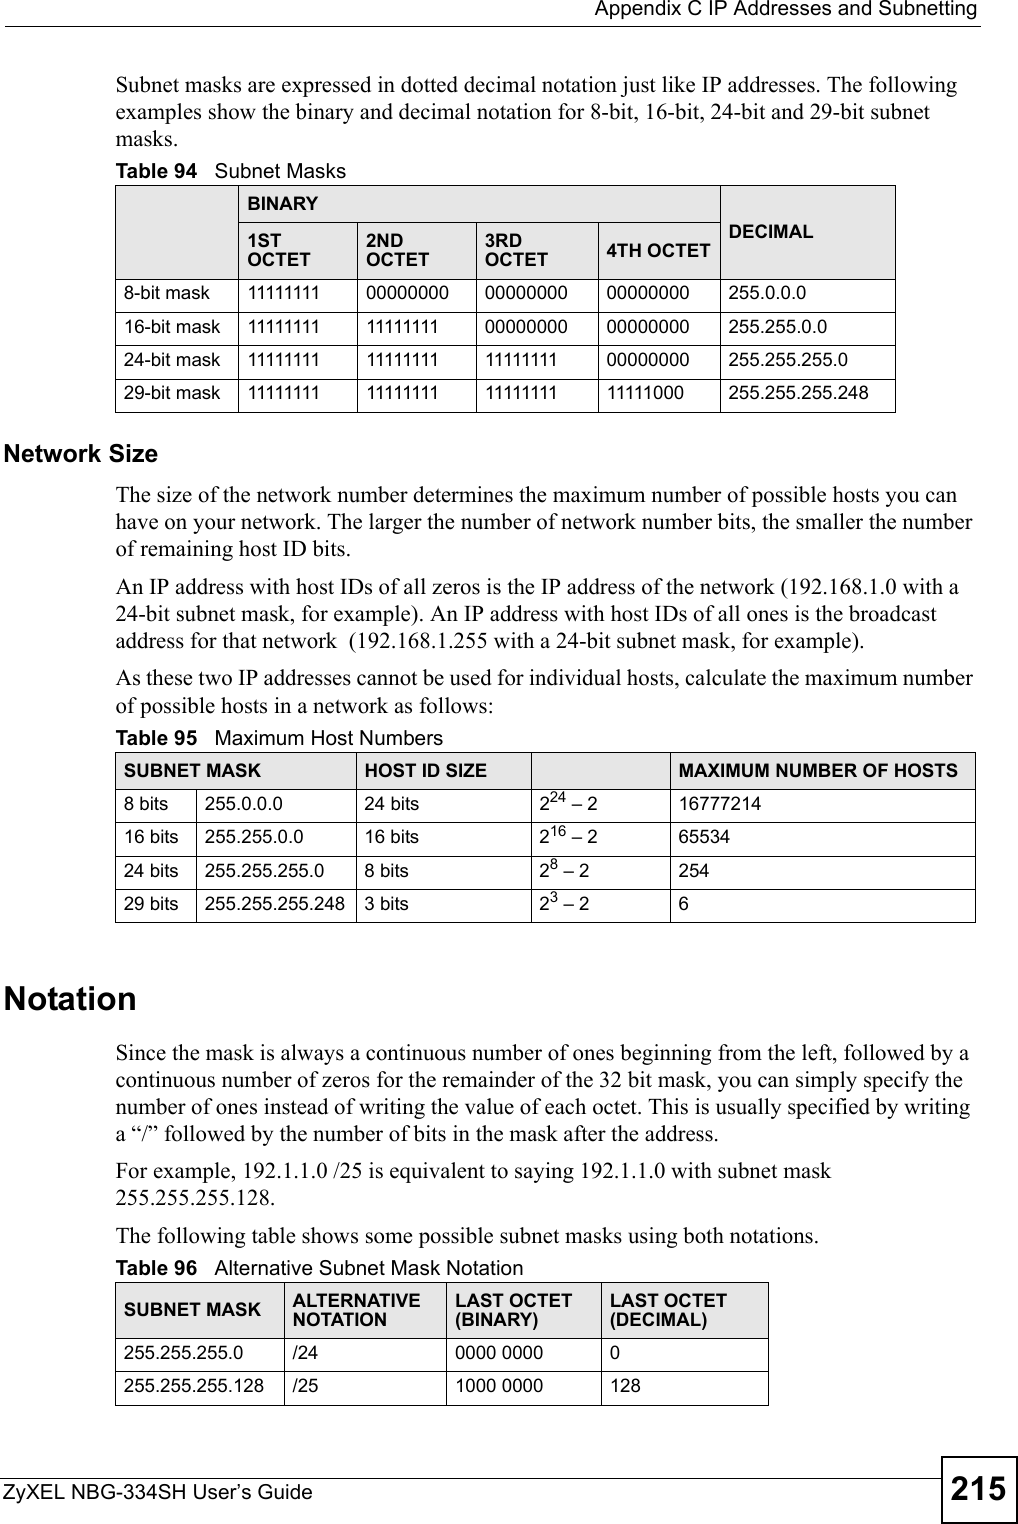  Appendix C IP Addresses and SubnettingZyXEL NBG-334SH User’s Guide 215Subnet masks are expressed in dotted decimal notation just like IP addresses. The following examples show the binary and decimal notation for 8-bit, 16-bit, 24-bit and 29-bit subnet masks. Network SizeThe size of the network number determines the maximum number of possible hosts you can have on your network. The larger the number of network number bits, the smaller the number of remaining host ID bits. An IP address with host IDs of all zeros is the IP address of the network (192.168.1.0 with a 24-bit subnet mask, for example). An IP address with host IDs of all ones is the broadcast address for that network  (192.168.1.255 with a 24-bit subnet mask, for example).As these two IP addresses cannot be used for individual hosts, calculate the maximum number of possible hosts in a network as follows:NotationSince the mask is always a continuous number of ones beginning from the left, followed by a continuous number of zeros for the remainder of the 32 bit mask, you can simply specify the number of ones instead of writing the value of each octet. This is usually specified by writing a “/” followed by the number of bits in the mask after the address. For example, 192.1.1.0 /25 is equivalent to saying 192.1.1.0 with subnet mask 255.255.255.128. The following table shows some possible subnet masks using both notations. Table 94   Subnet MasksBINARYDECIMAL1ST OCTET2ND OCTET3RD OCTET 4TH OCTET8-bit mask 11111111 00000000 00000000 00000000 255.0.0.016-bit mask 11111111 11111111 00000000 00000000 255.255.0.024-bit mask 11111111 11111111 11111111 00000000 255.255.255.029-bit mask 11111111 11111111 11111111 11111000 255.255.255.248Table 95   Maximum Host NumbersSUBNET MASK HOST ID SIZE MAXIMUM NUMBER OF HOSTS8 bits 255.0.0.0 24 bits 224 – 2 1677721416 bits 255.255.0.0 16 bits 216 – 2 6553424 bits 255.255.255.0 8 bits 28 – 2 25429 bits 255.255.255.248 3 bits 23 – 2 6Table 96   Alternative Subnet Mask NotationSUBNET MASK ALTERNATIVE NOTATIONLAST OCTET (BINARY)LAST OCTET (DECIMAL)255.255.255.0 /24 0000 0000 0255.255.255.128 /25 1000 0000 128